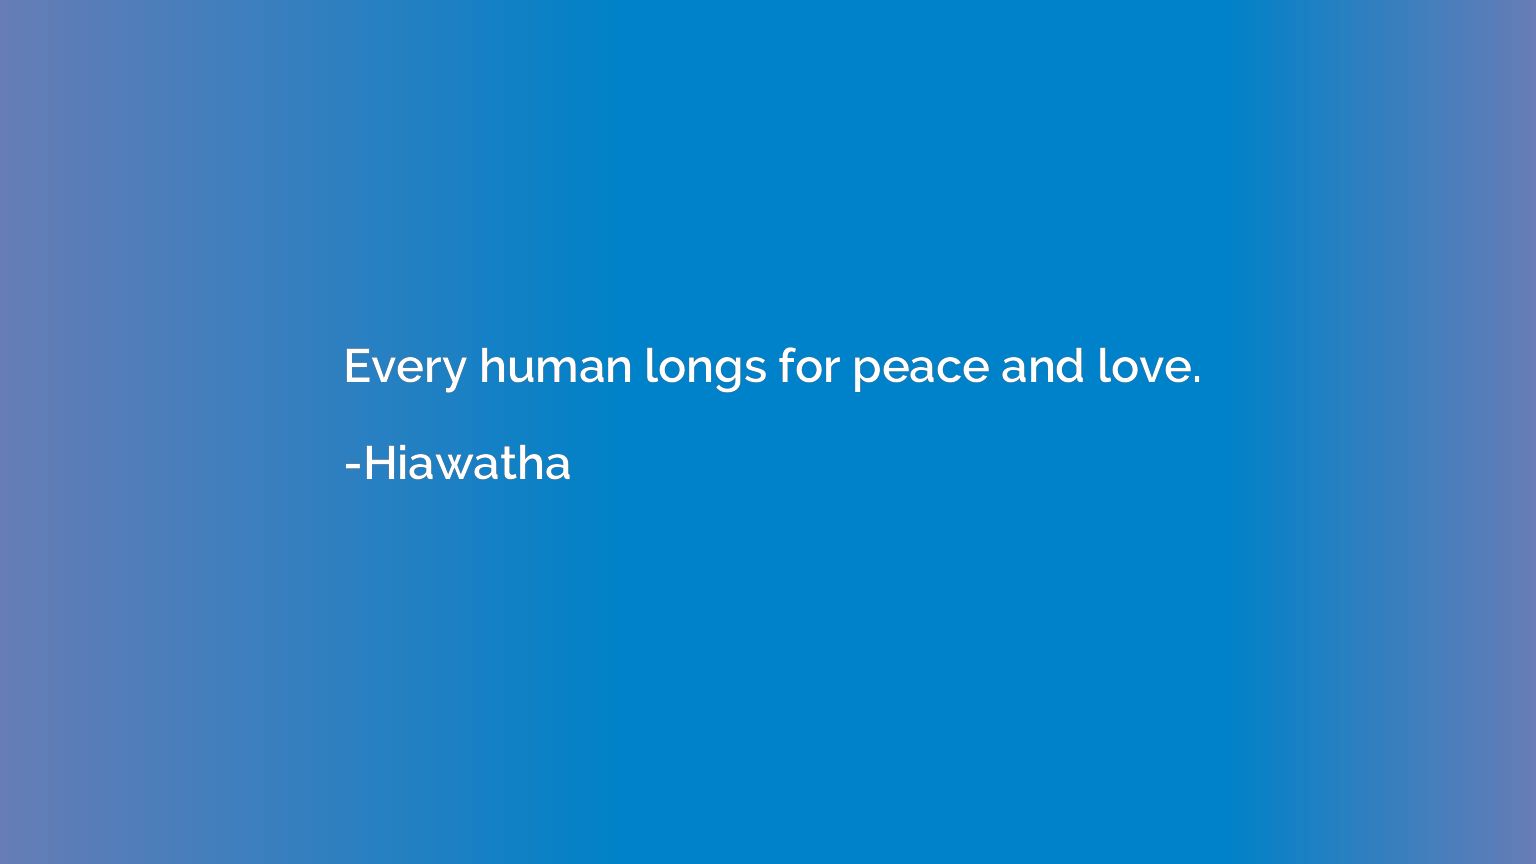 Every human longs for peace and love.